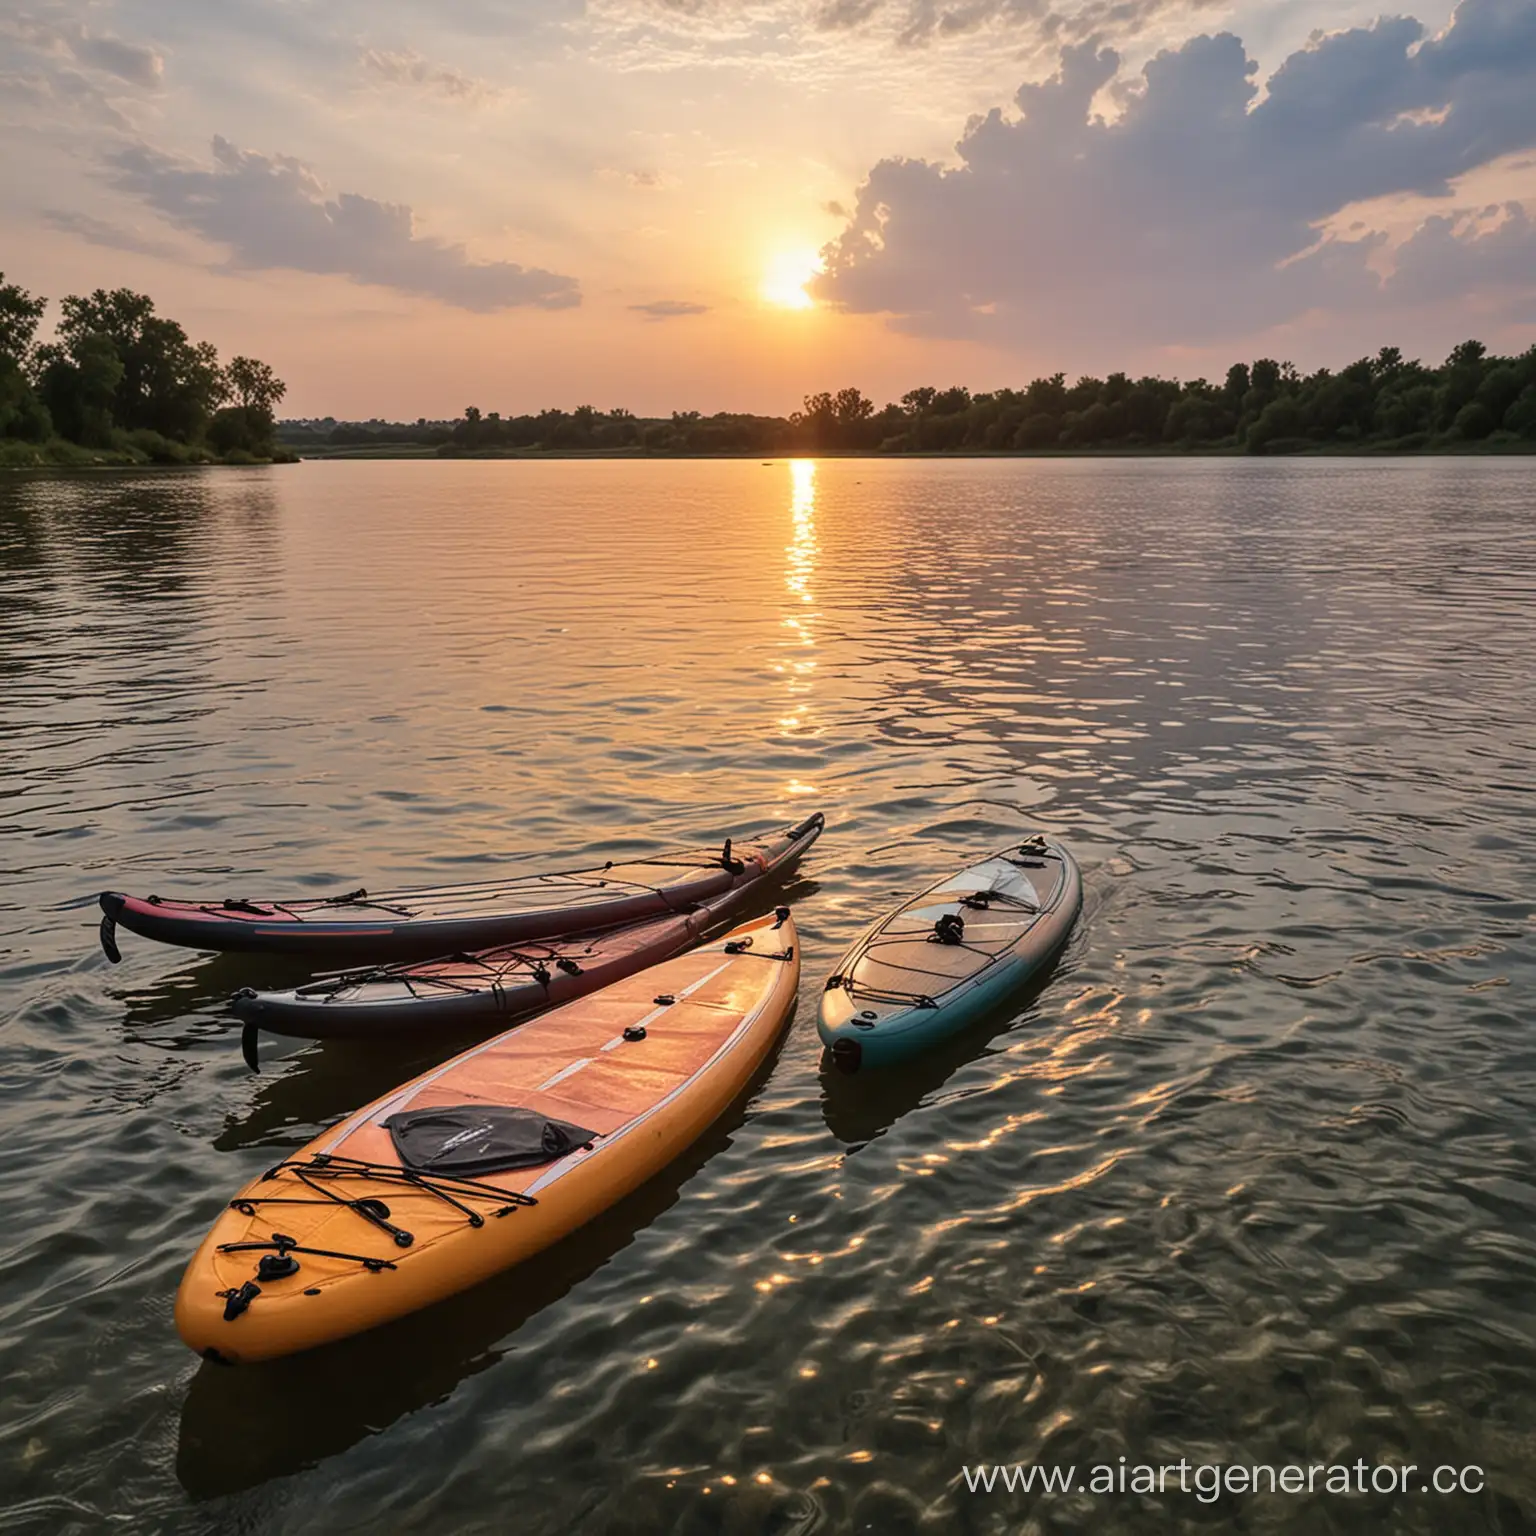 Tranquil-Sunset-River-Scene-with-Floating-SUP-Boards